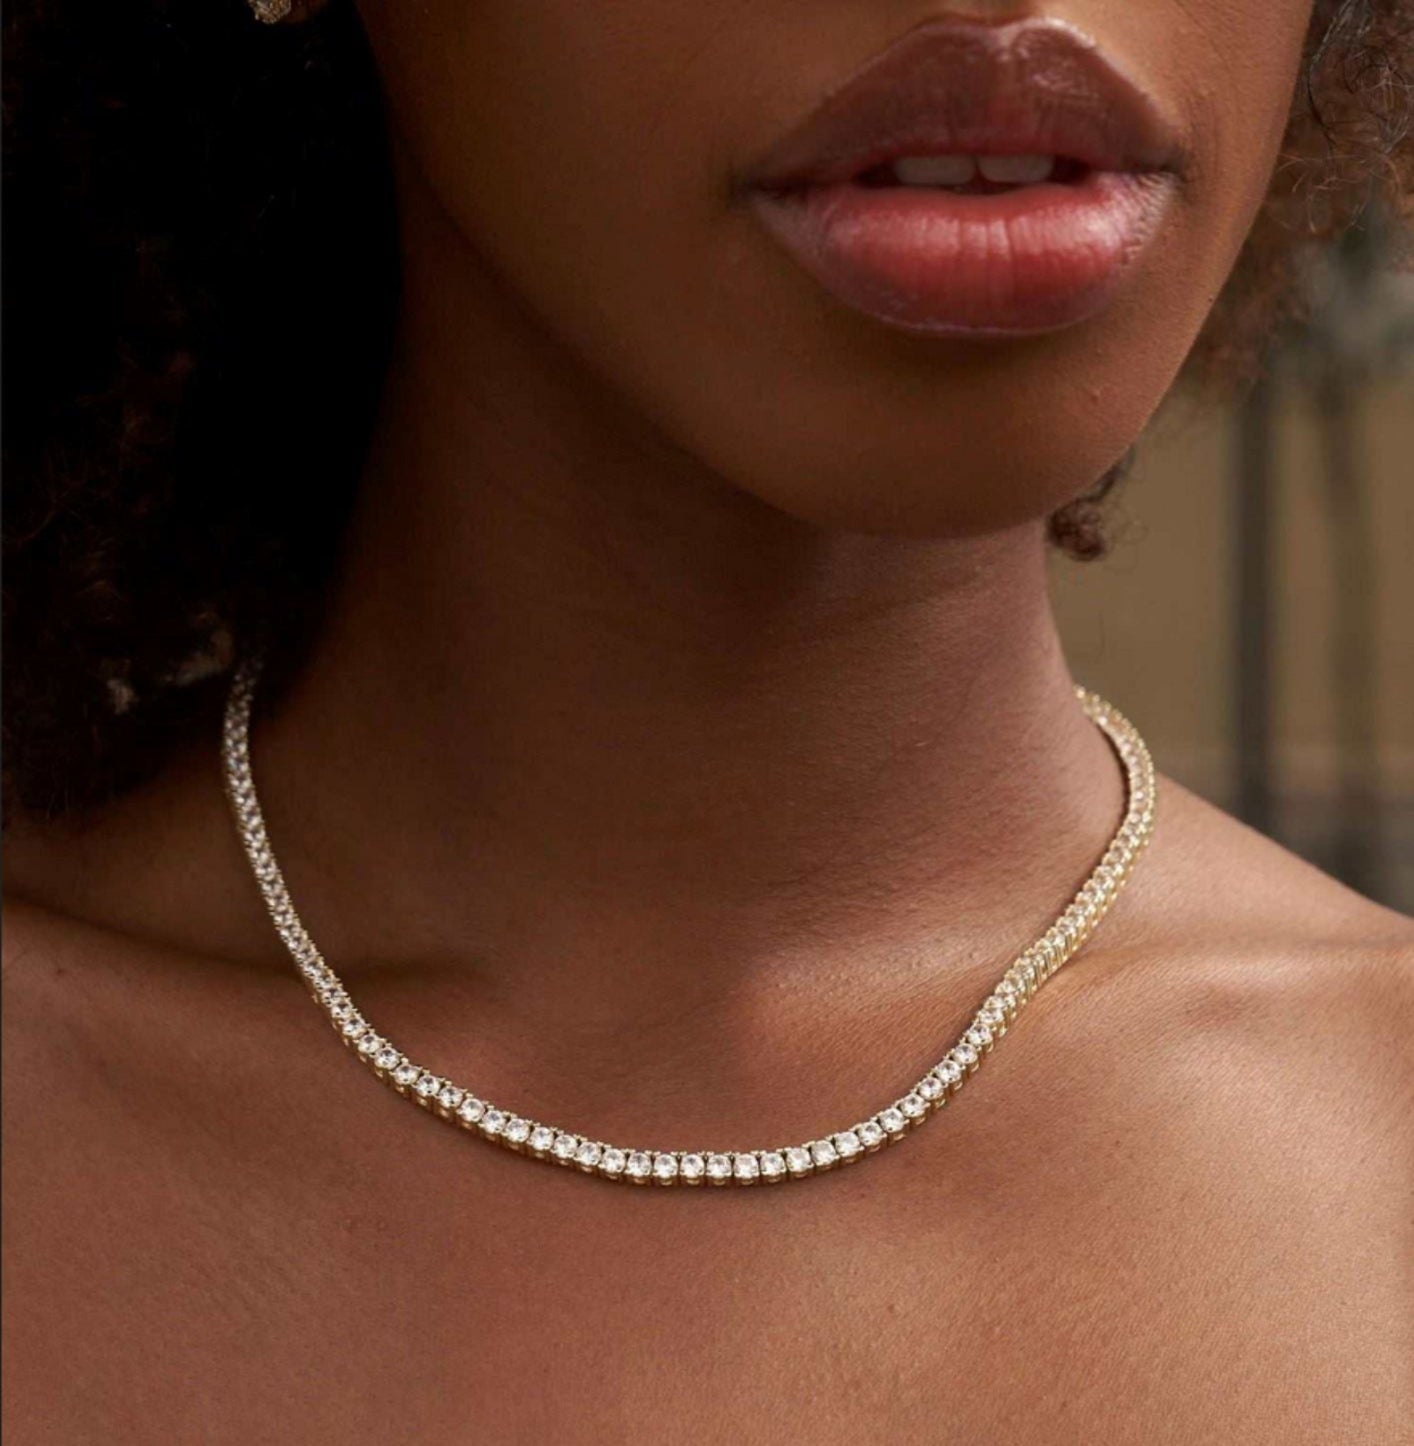 TENNIS NECKLACE - GOLD ring Yubama Jewelry Online Store - The Elegant Designs of Gold and Silver ! 46cm 